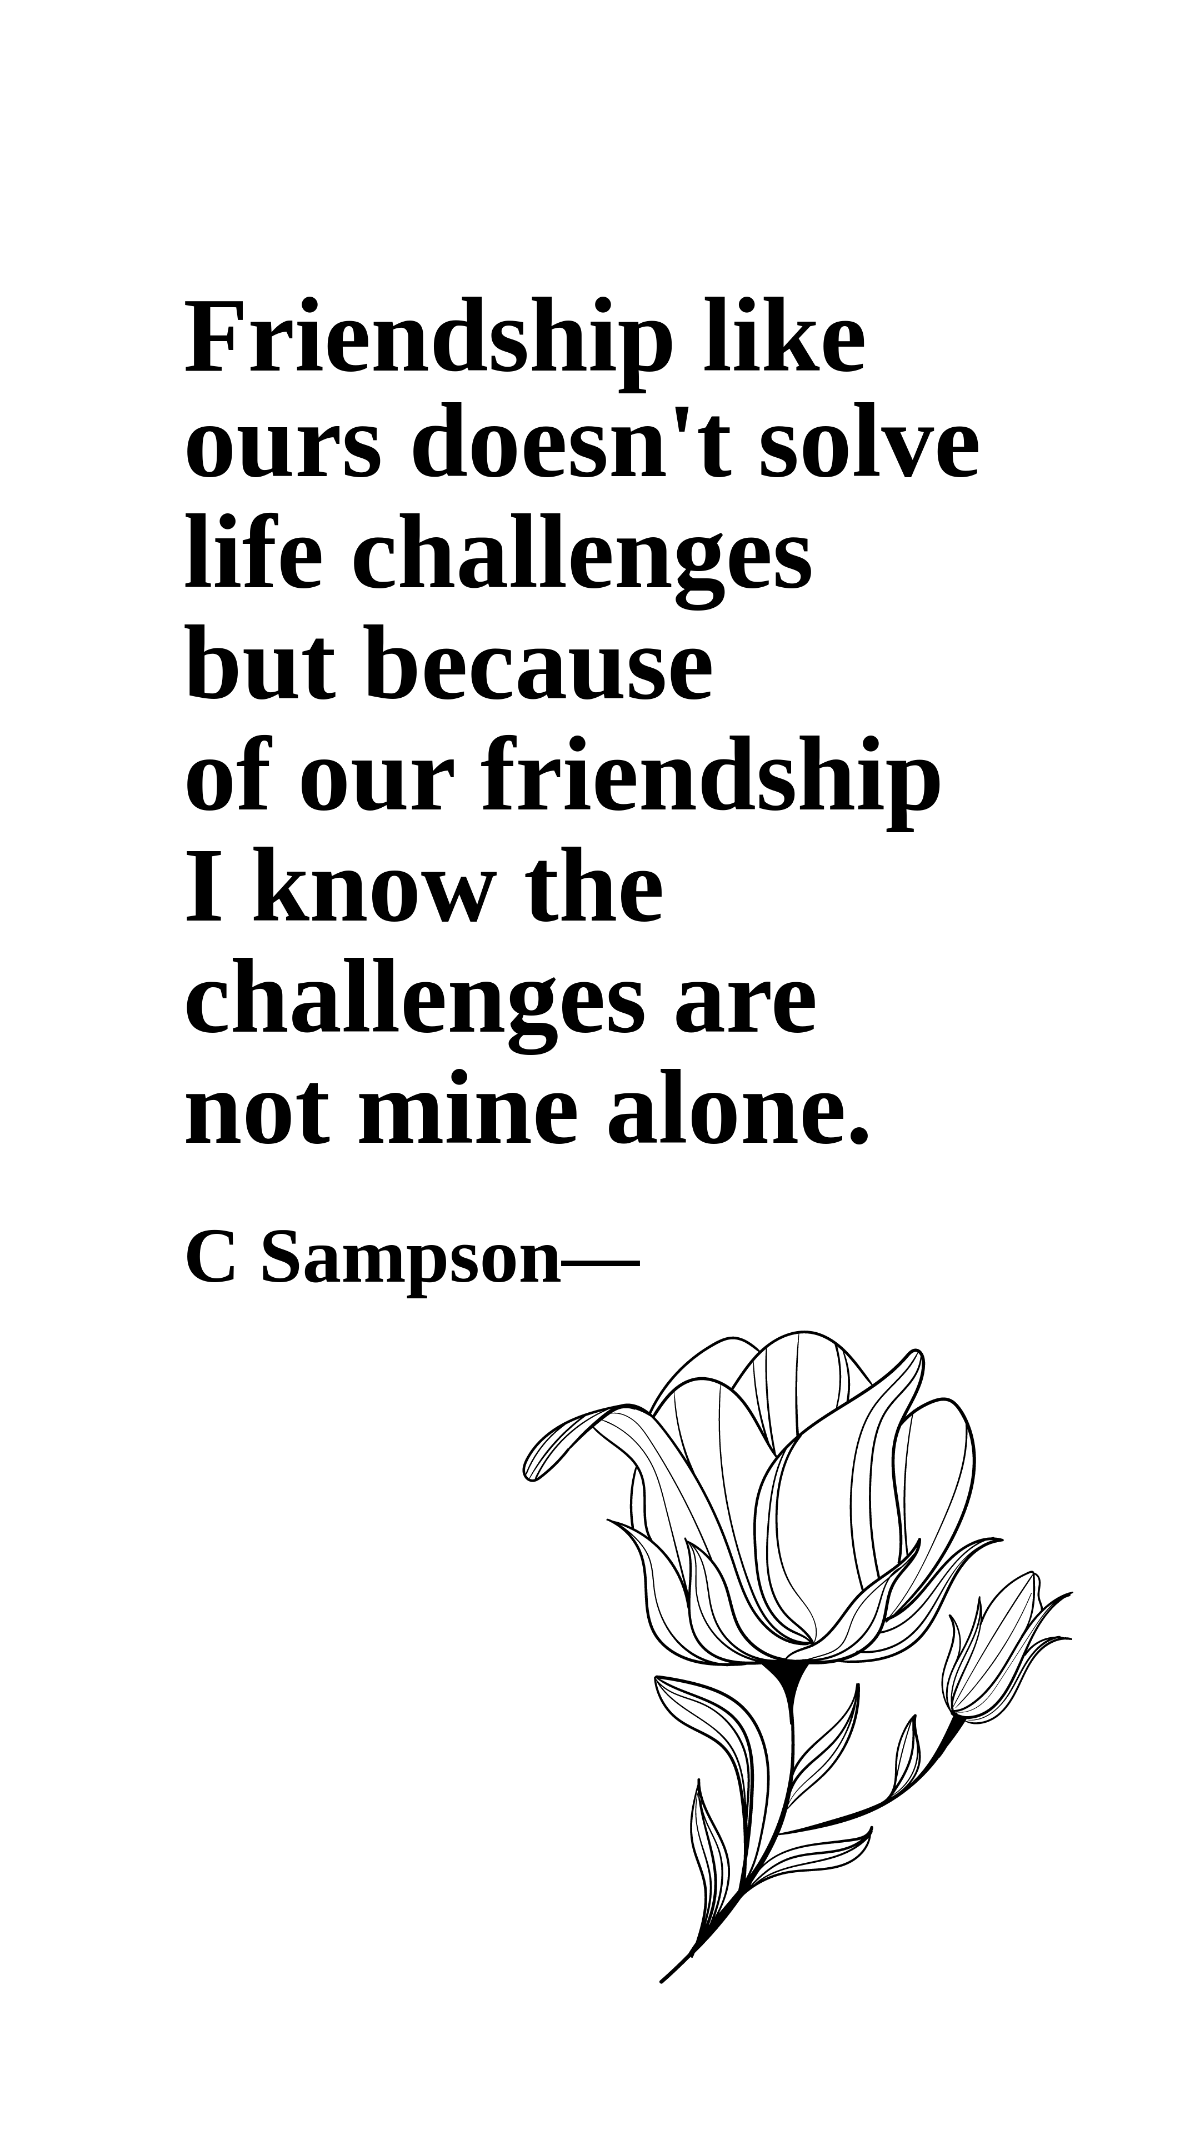 C Sampson - Friendship like ours doesn't solve life challenges but because of our friendship I know the challenges are not mine alone. Template